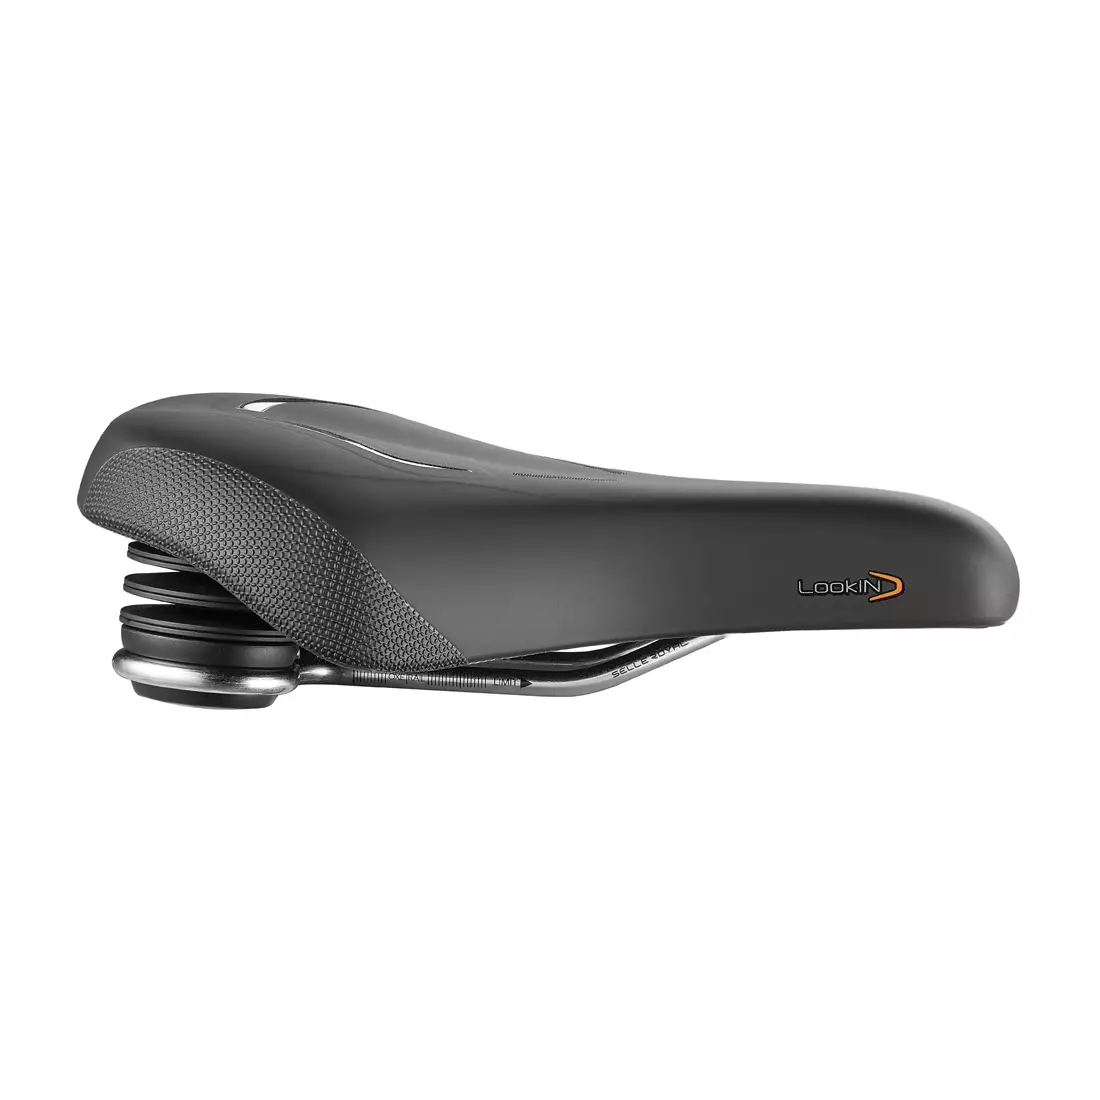 SELLEROYAL LOOKIN 3D RELAXED bicycle saddle 90st. gel SR-52C6UE0A091Q0